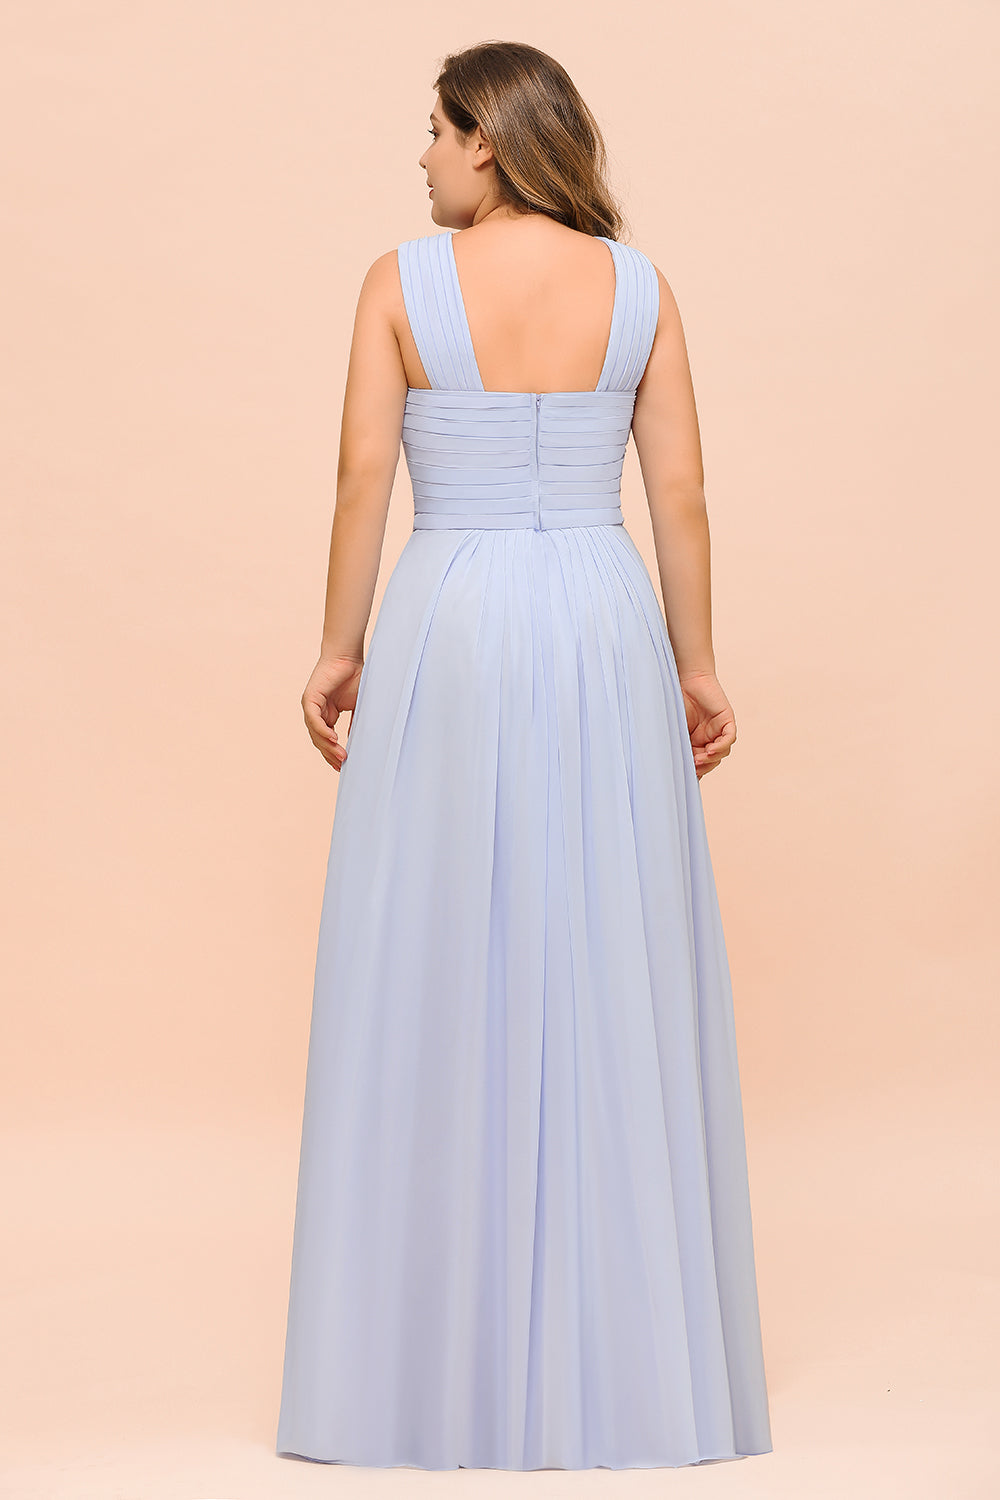 Plus Size Affordable Lavender Chiffon Bridesmaid Dresses with Ruffle-27dress